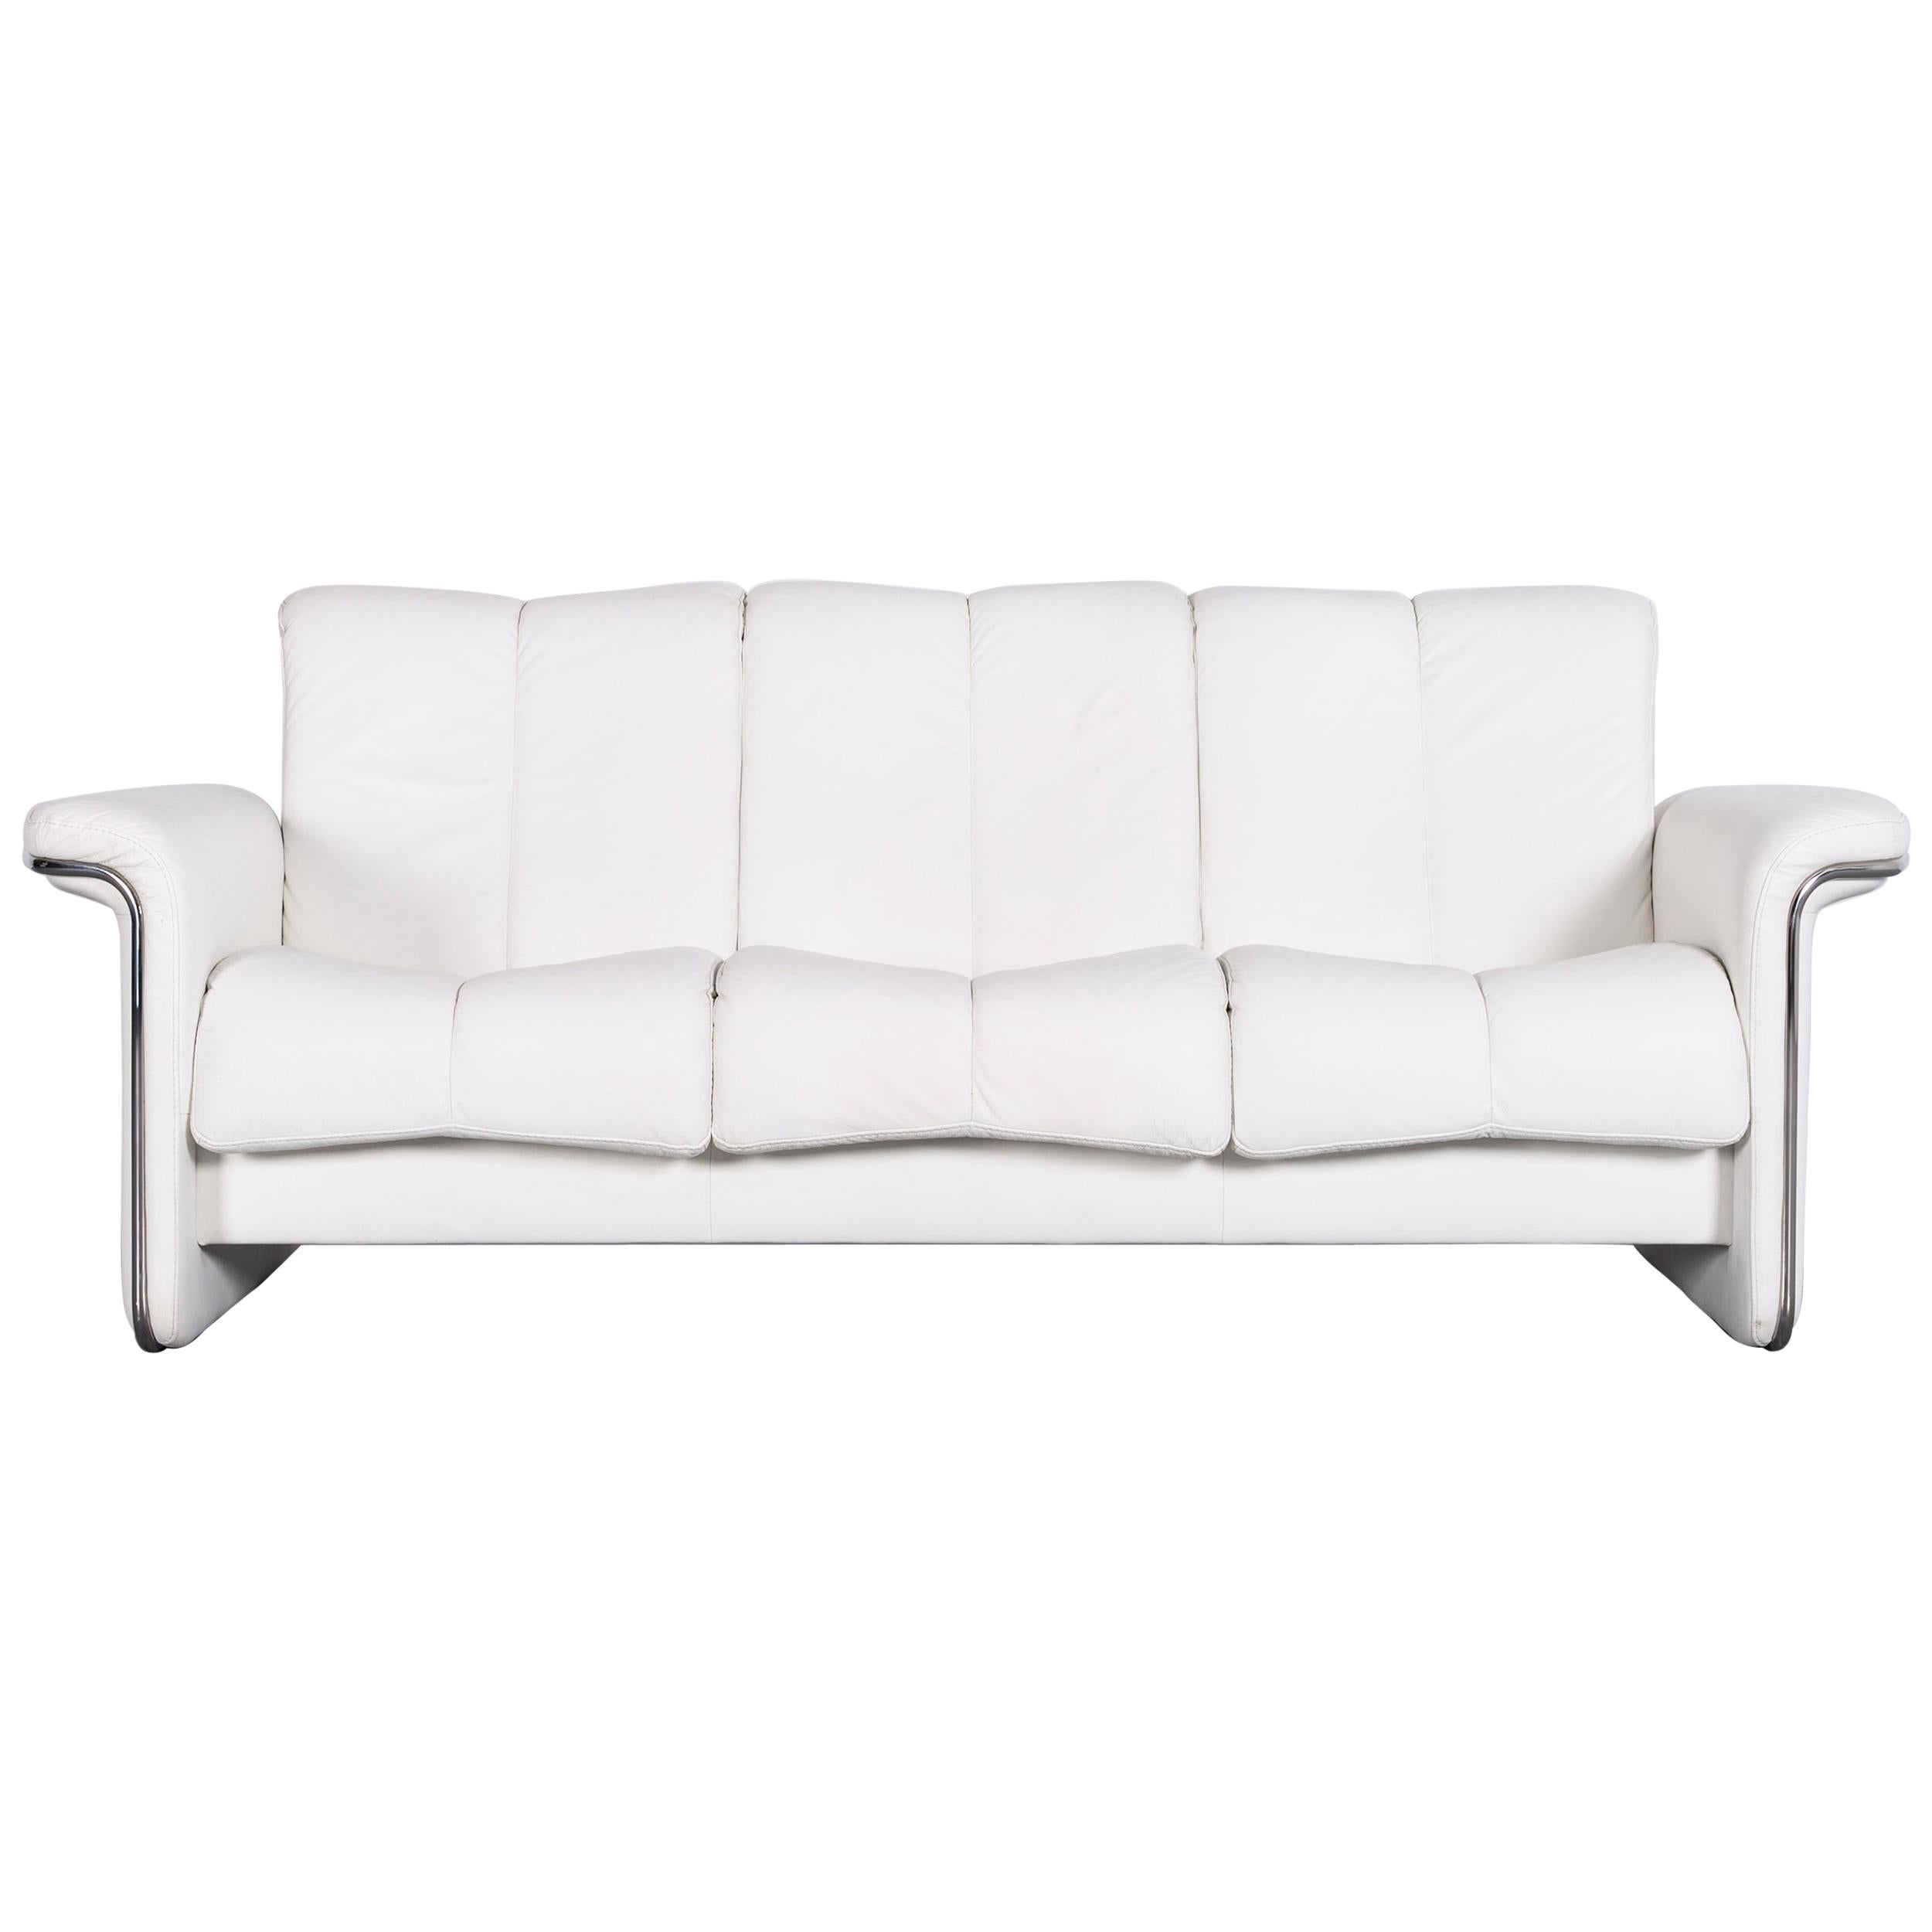 Ekornes Stressless Blues Sofa White Leather Three-Seat with Function For Sale